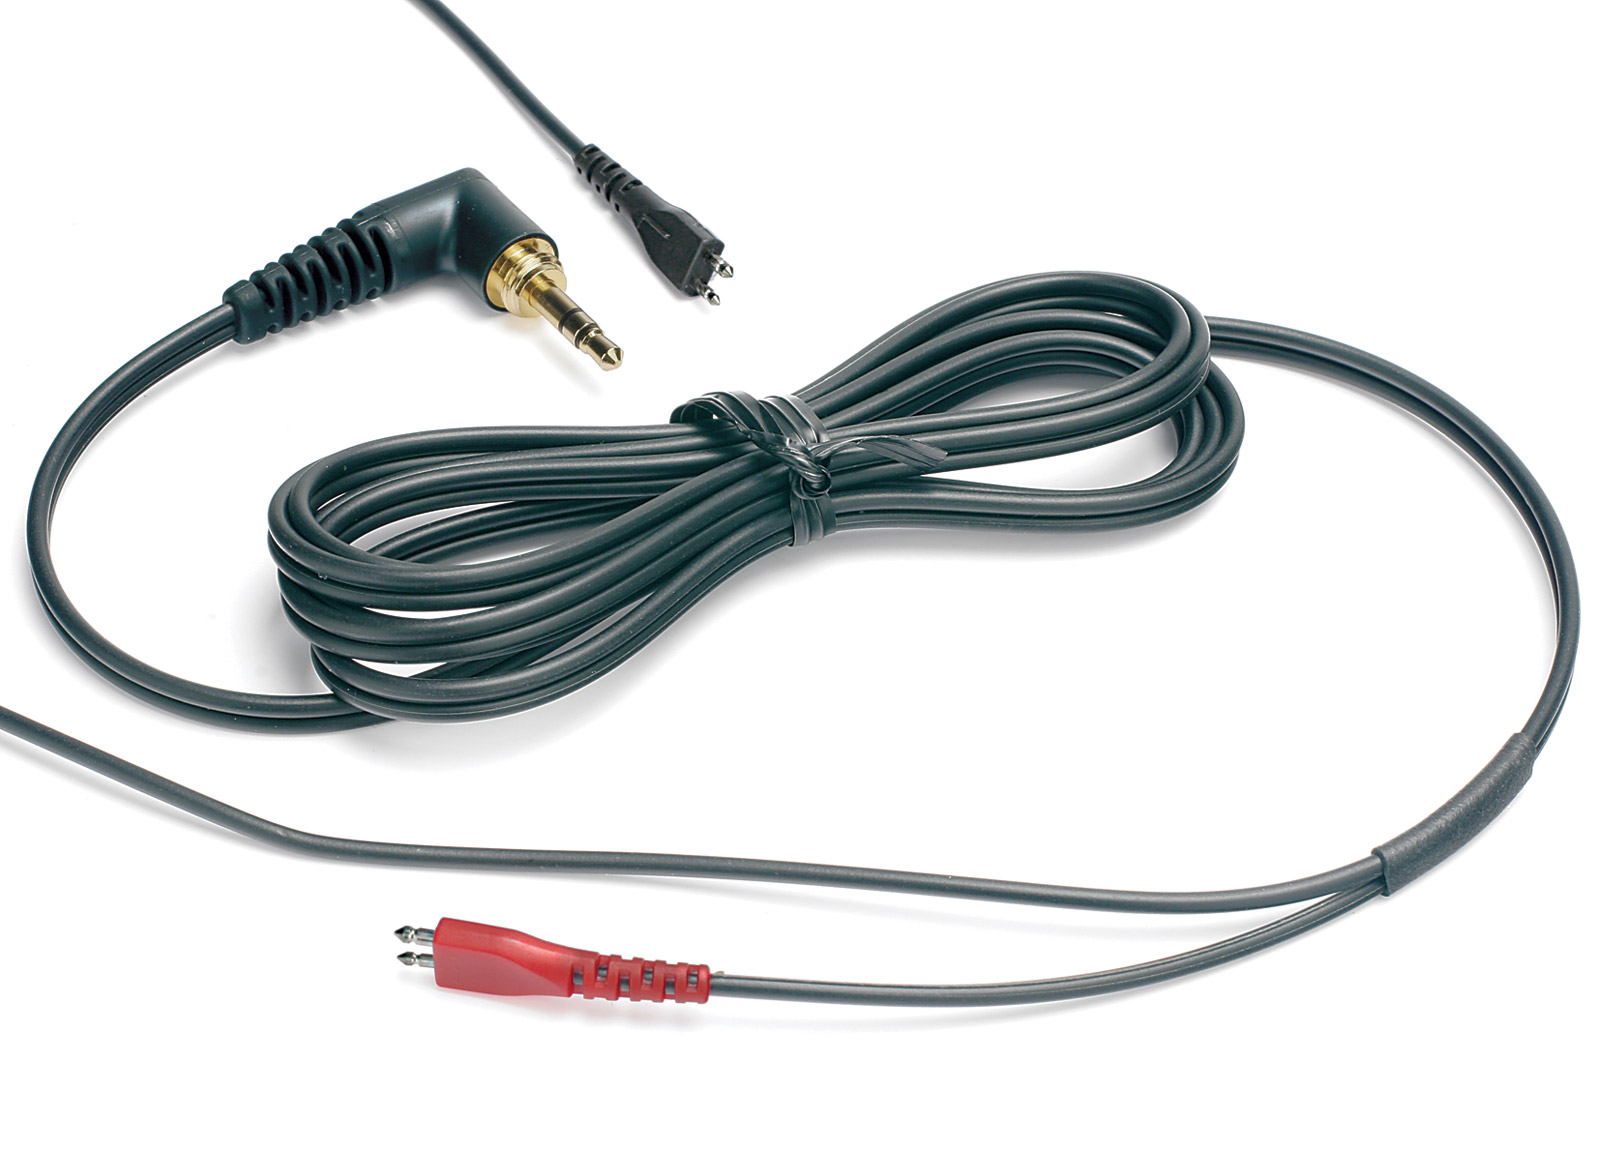 SENNHEISER 523874 SPARE CABLE For HD25 headphones, 3.5mm threaded right ...